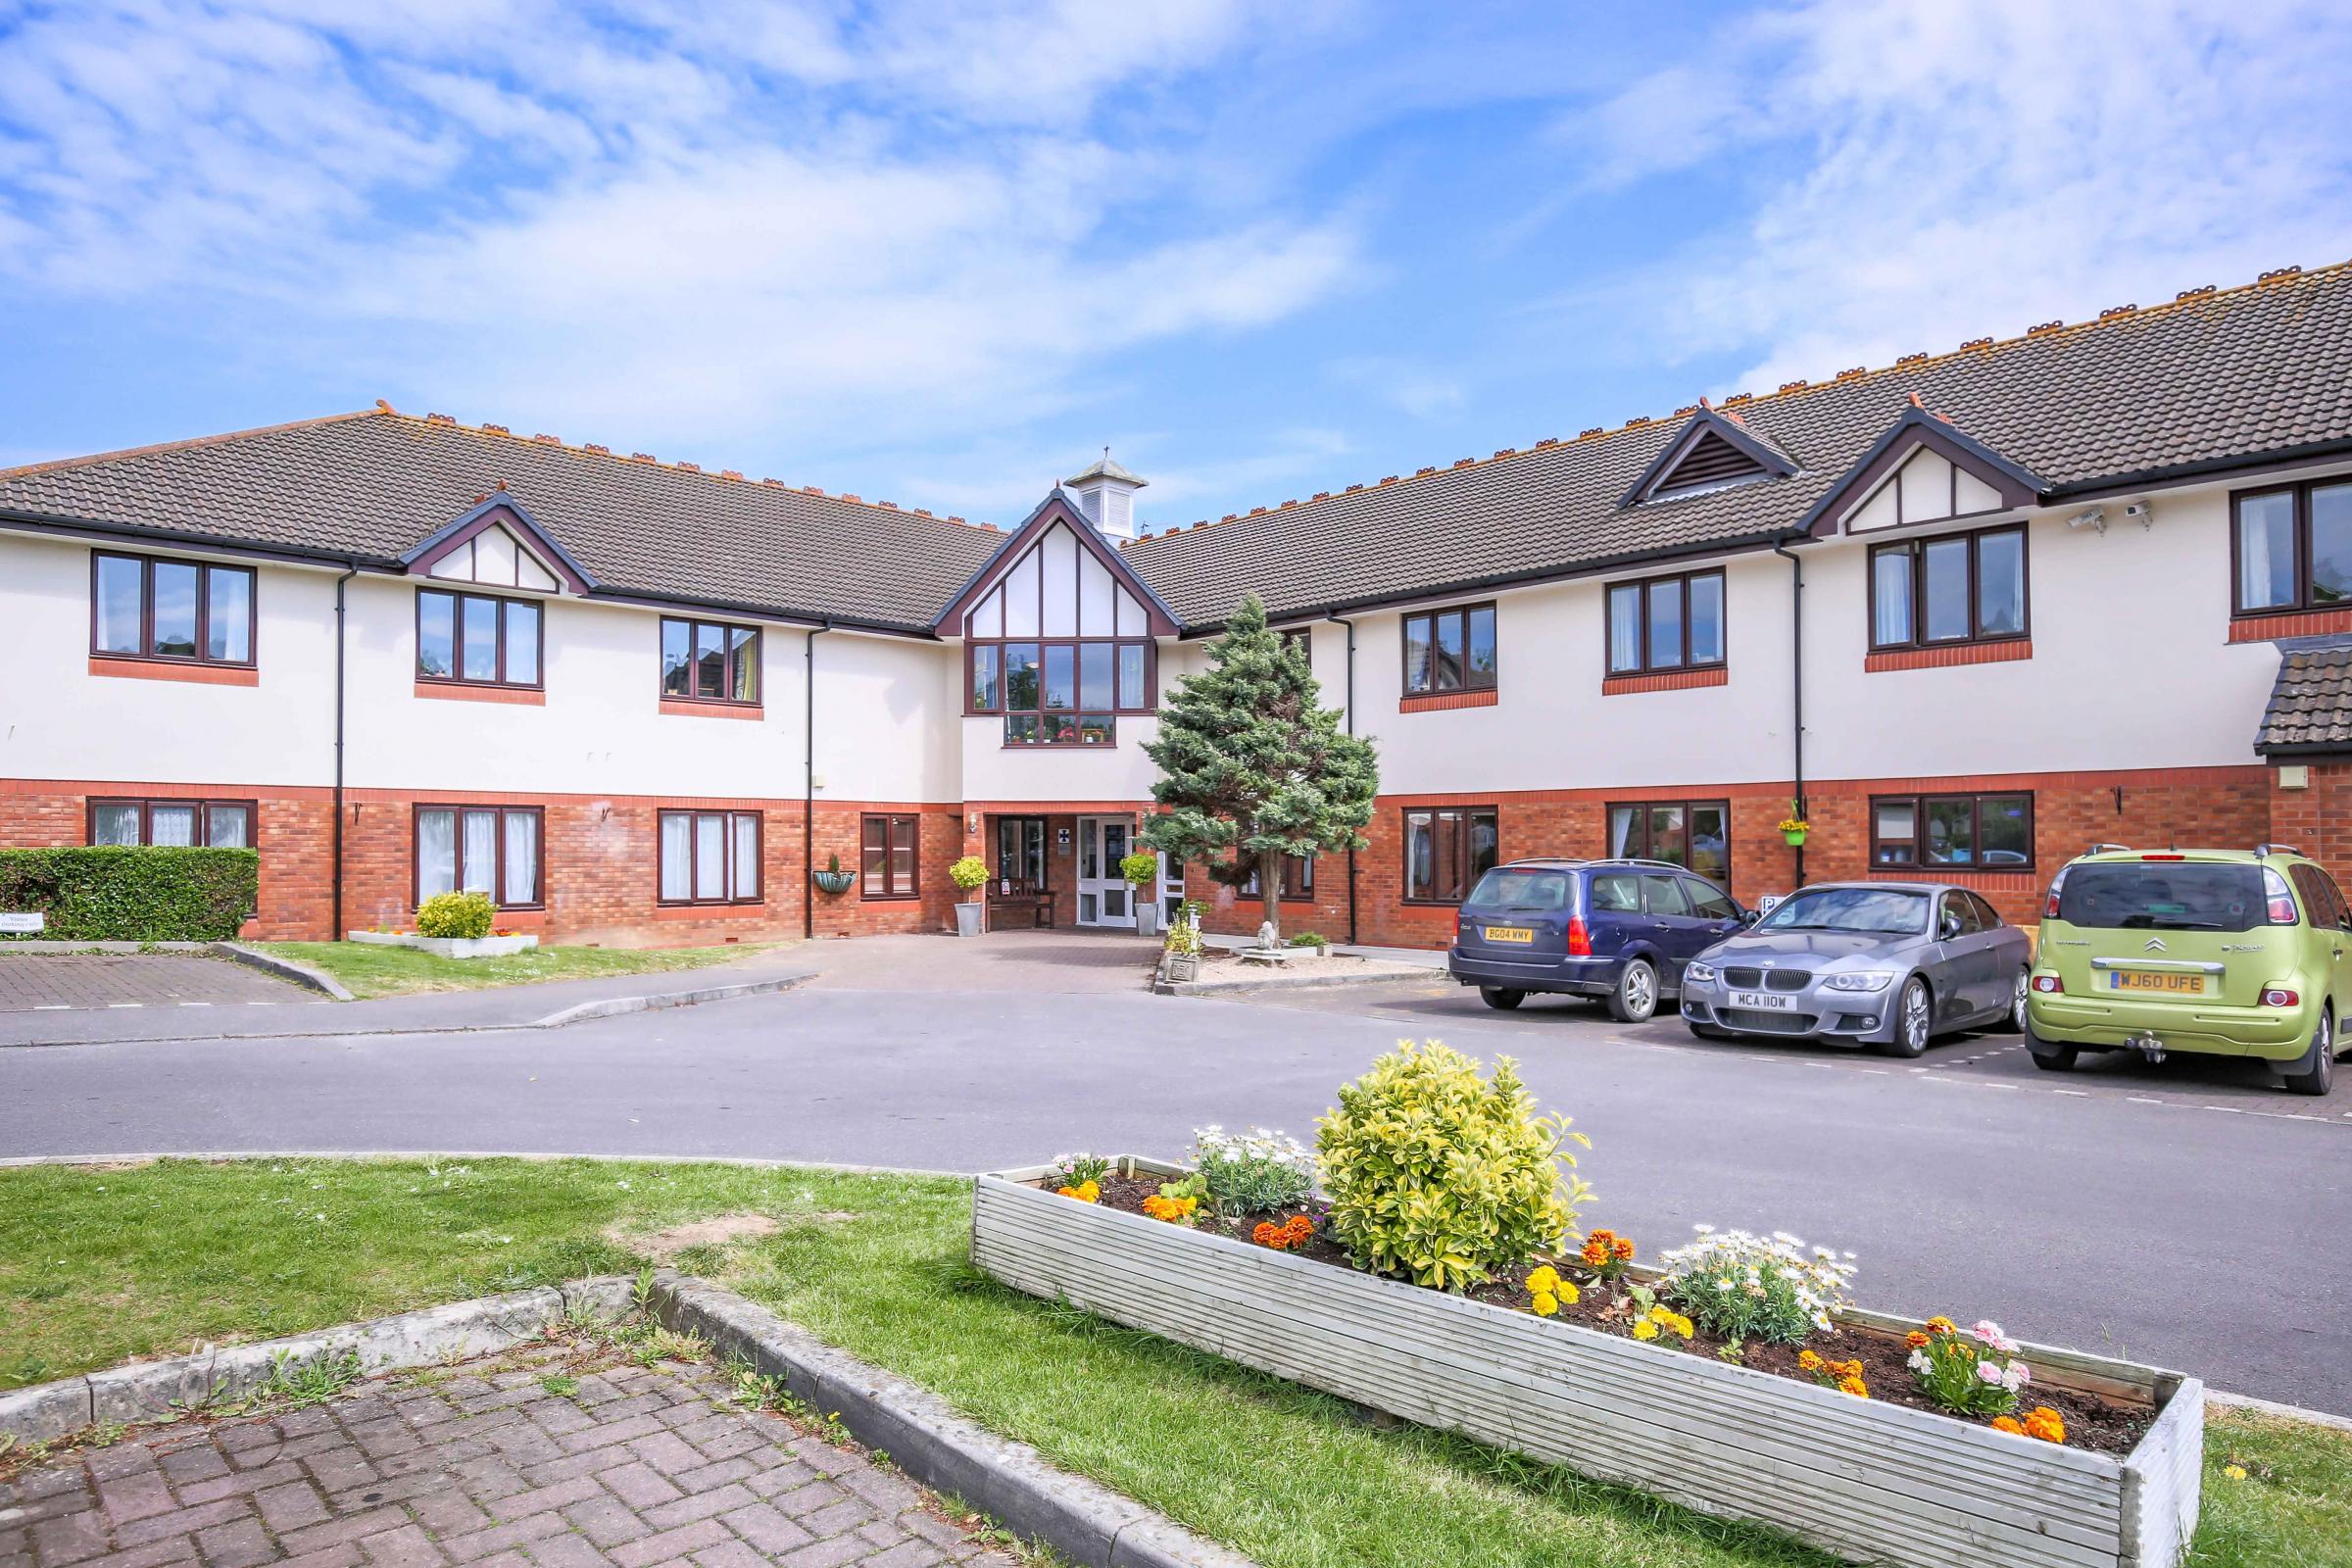 West Abbey Care Home